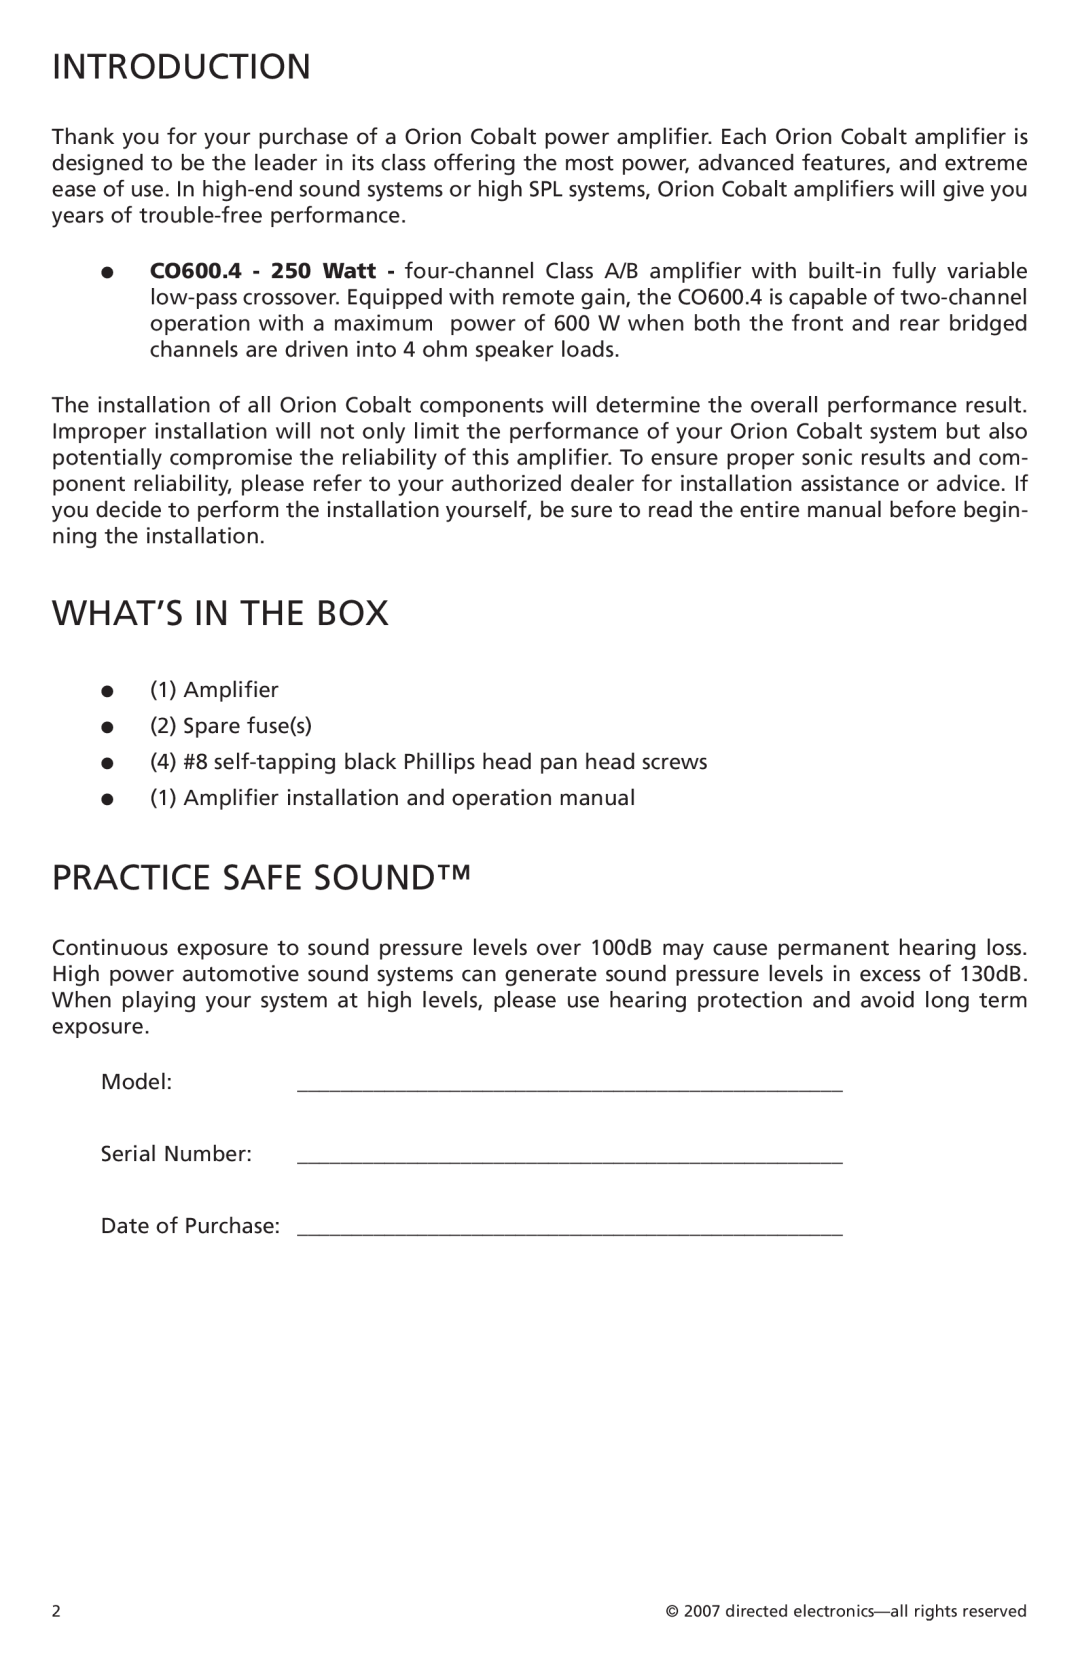 Orion G42110 owner manual Introduction, What’S In The Box, Practice Safe Sound 